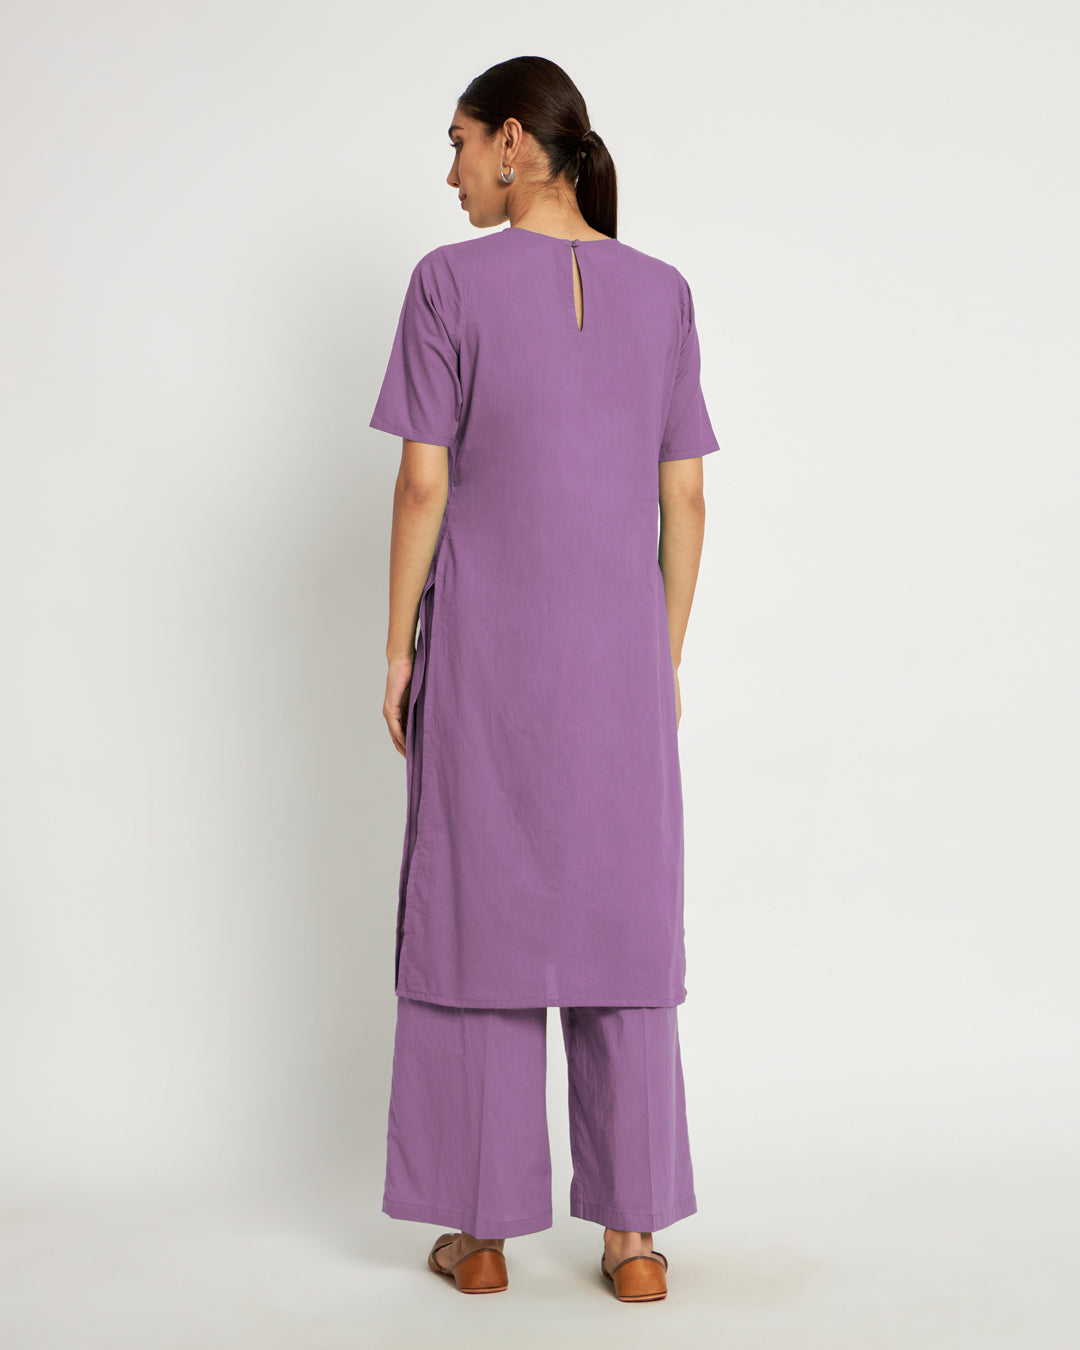 Wisteria Purple Round Neck Long Solid Kurta (Without Bottoms)